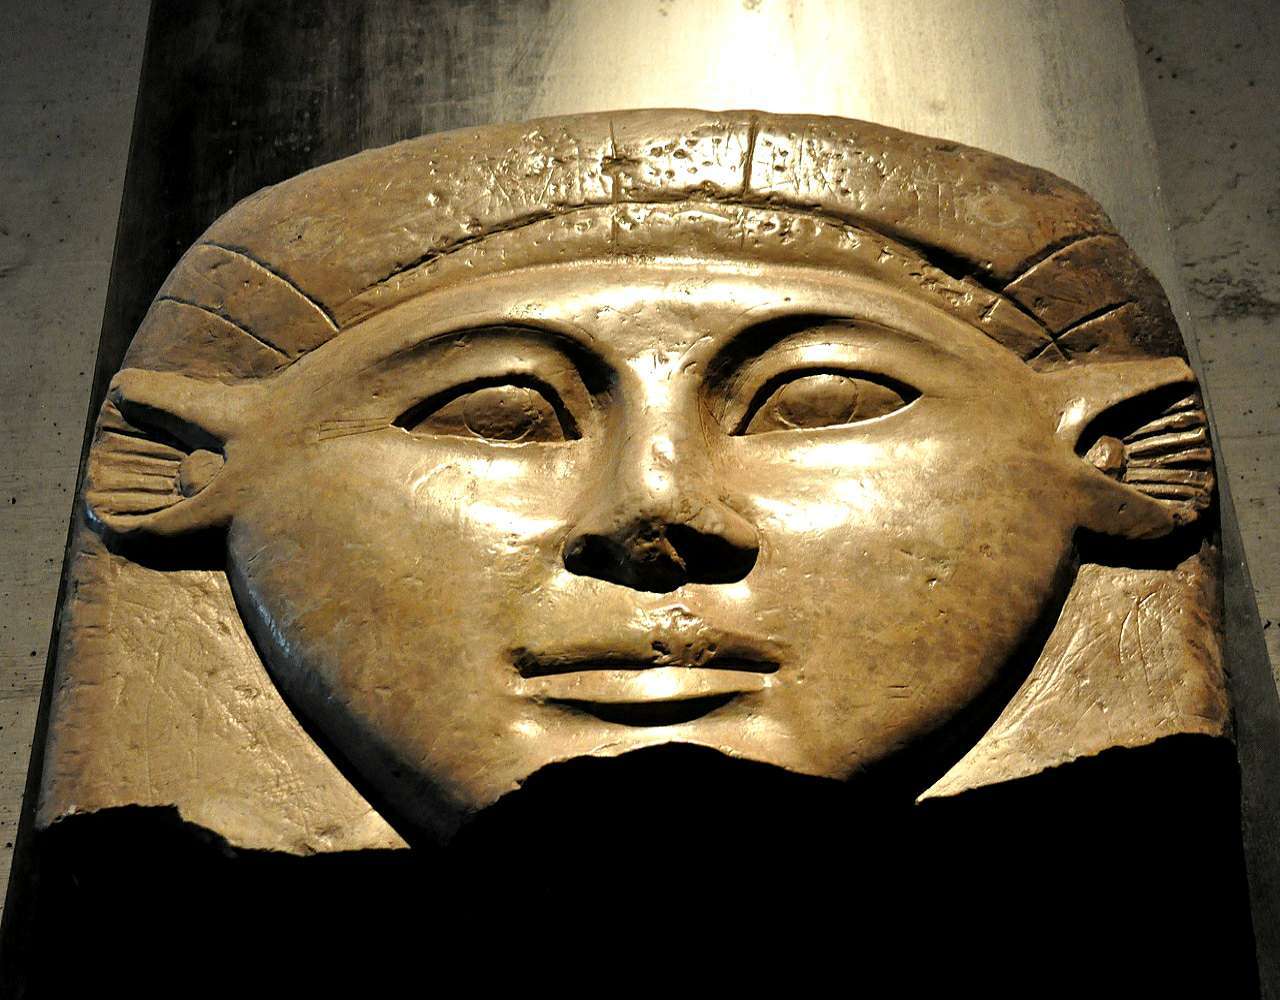 the head of the goddess Hathor, from Egypt